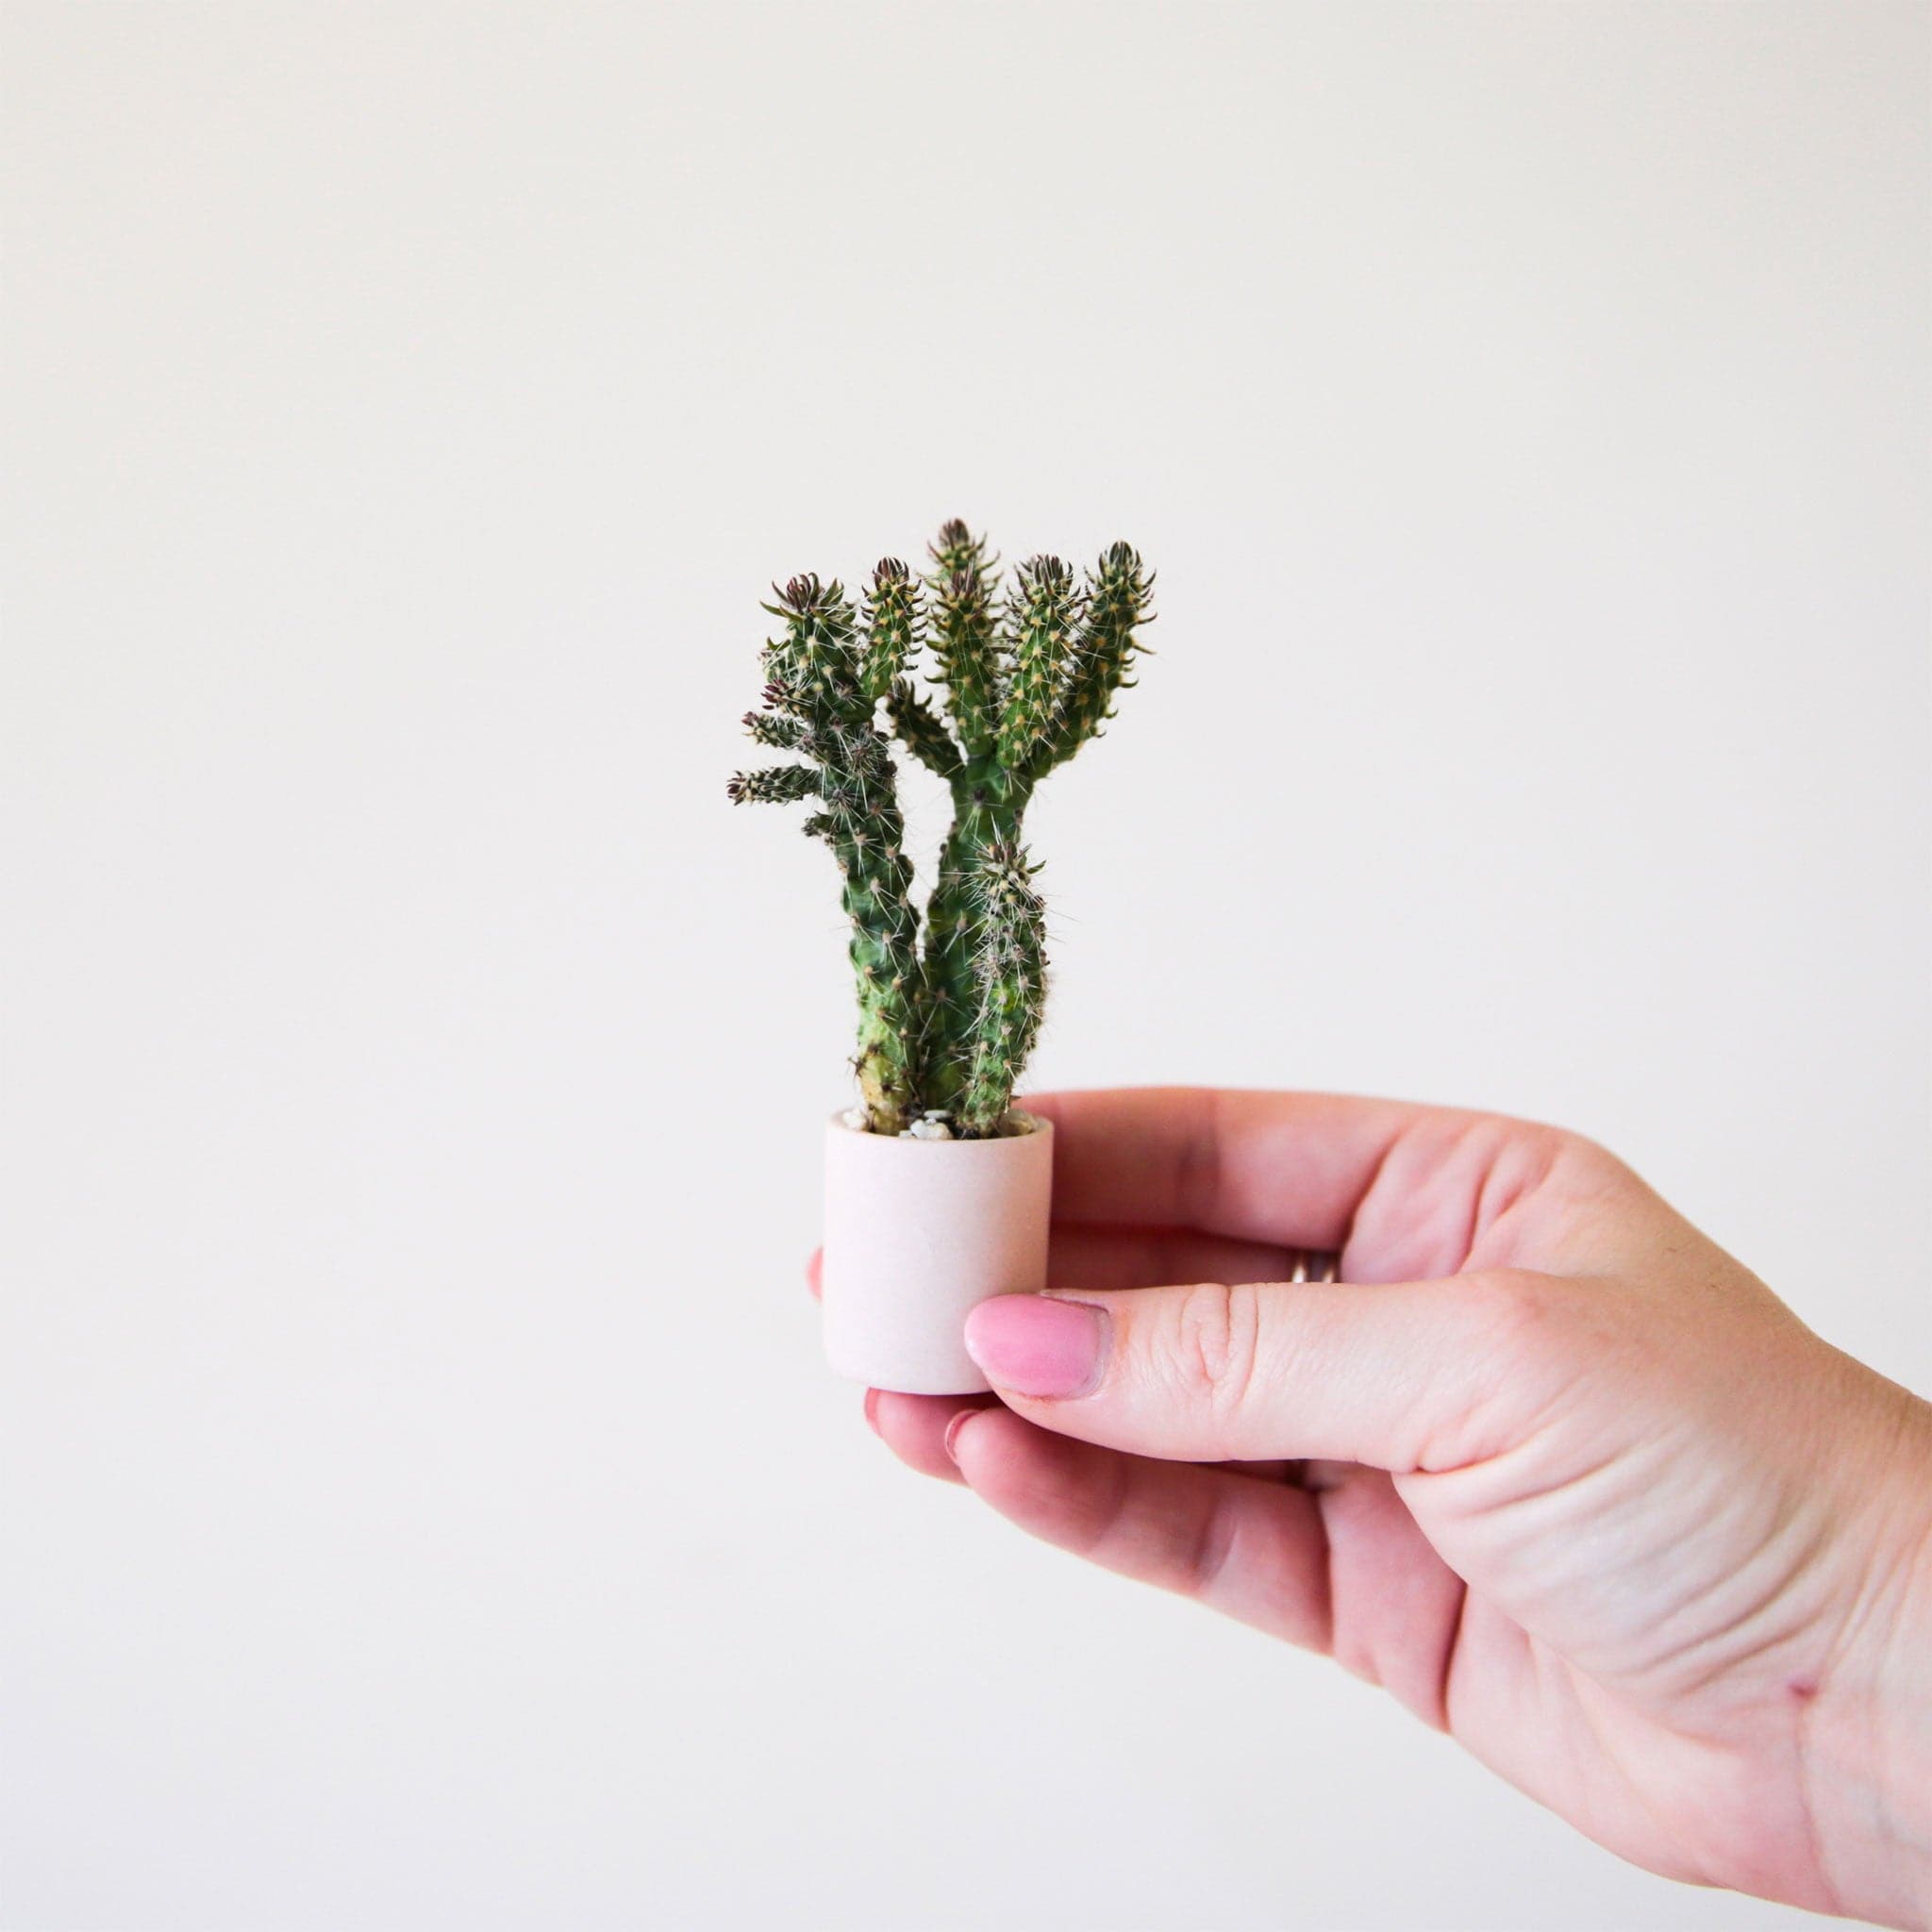 Against a white background is a hand holding a tiny, round pink pot. Inside the pot is a tiny green cactus.